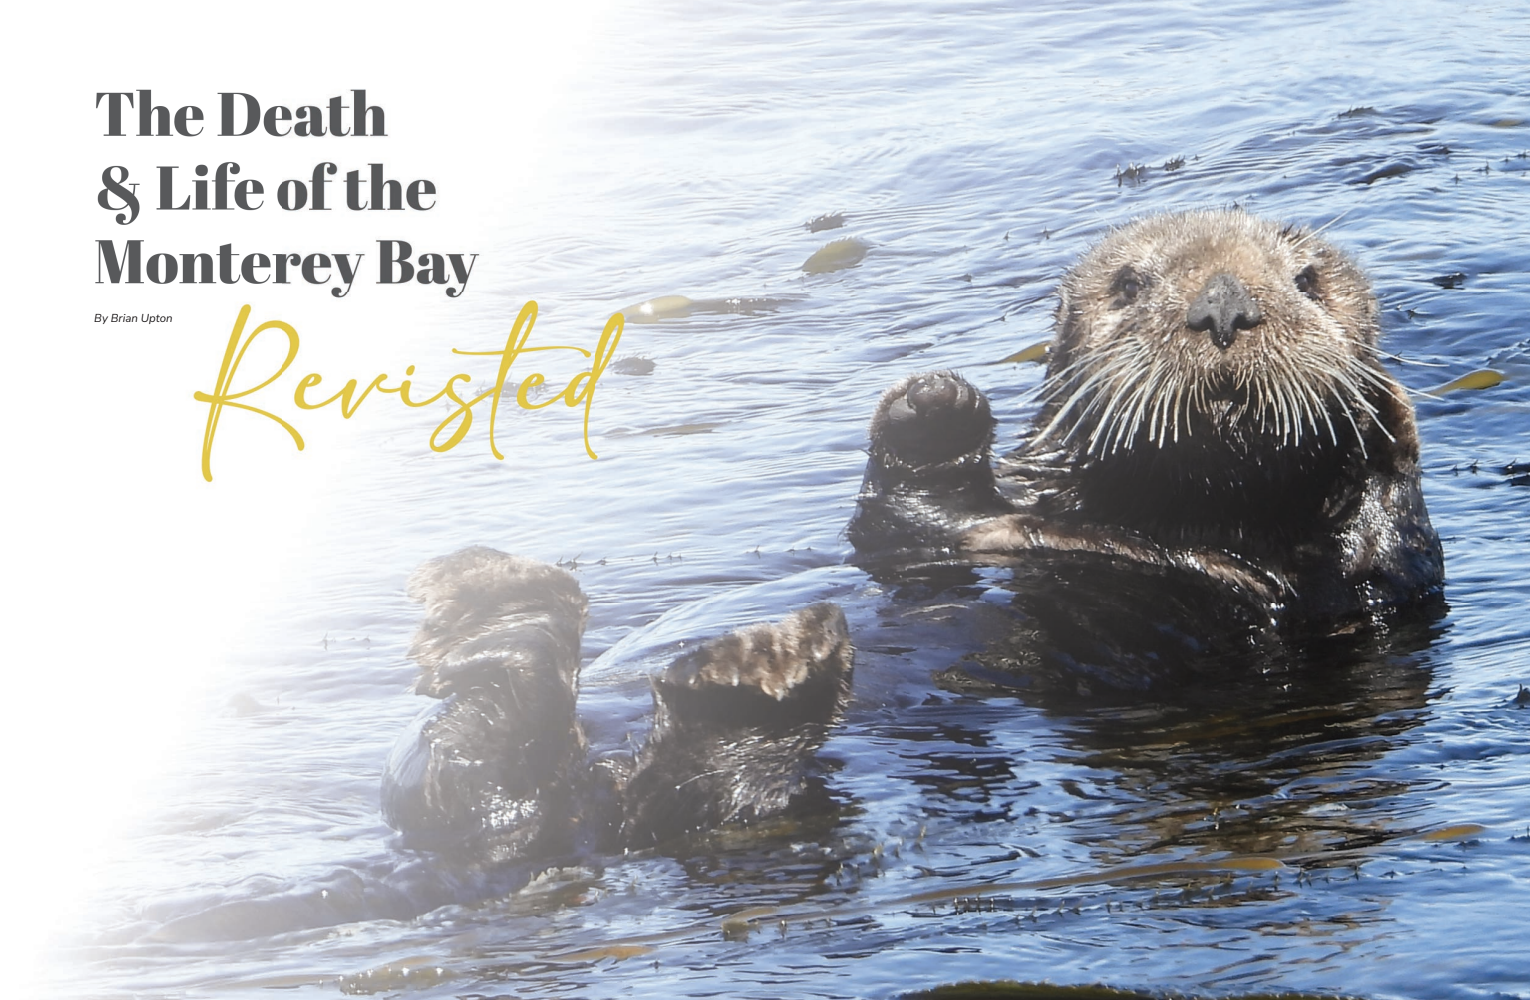 A Sea Otter swims on his back in the Monterey Bay with The Death & Life of the Monterey Bay Revisited by Brian Upton captioned